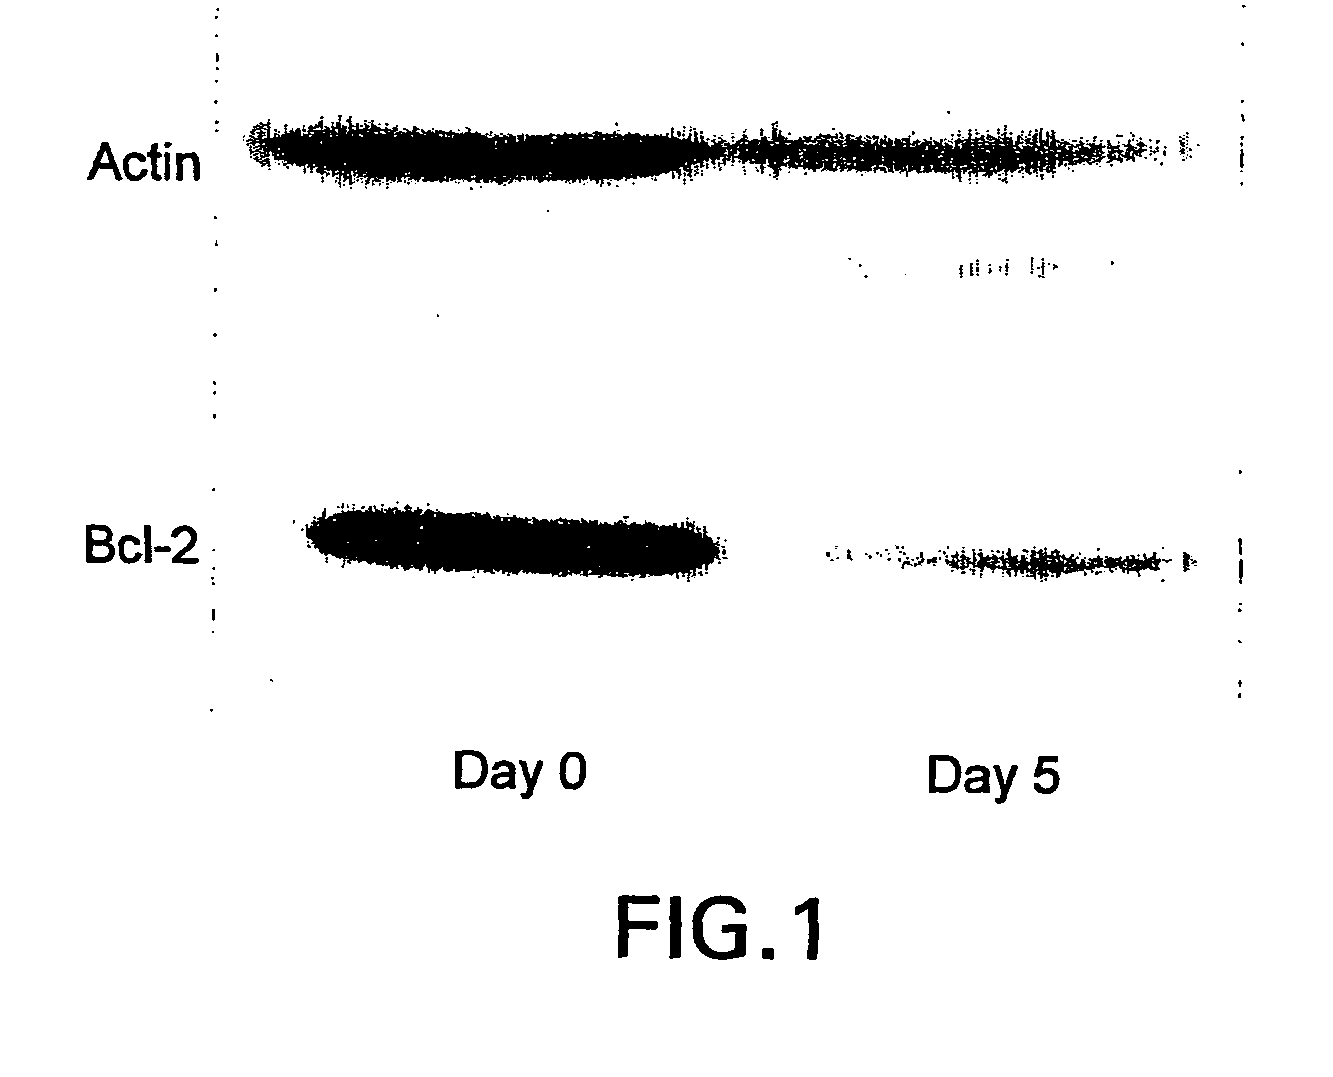 Methods of treatment of a bcl-2 disorder using bcl-2 antisense oligomers